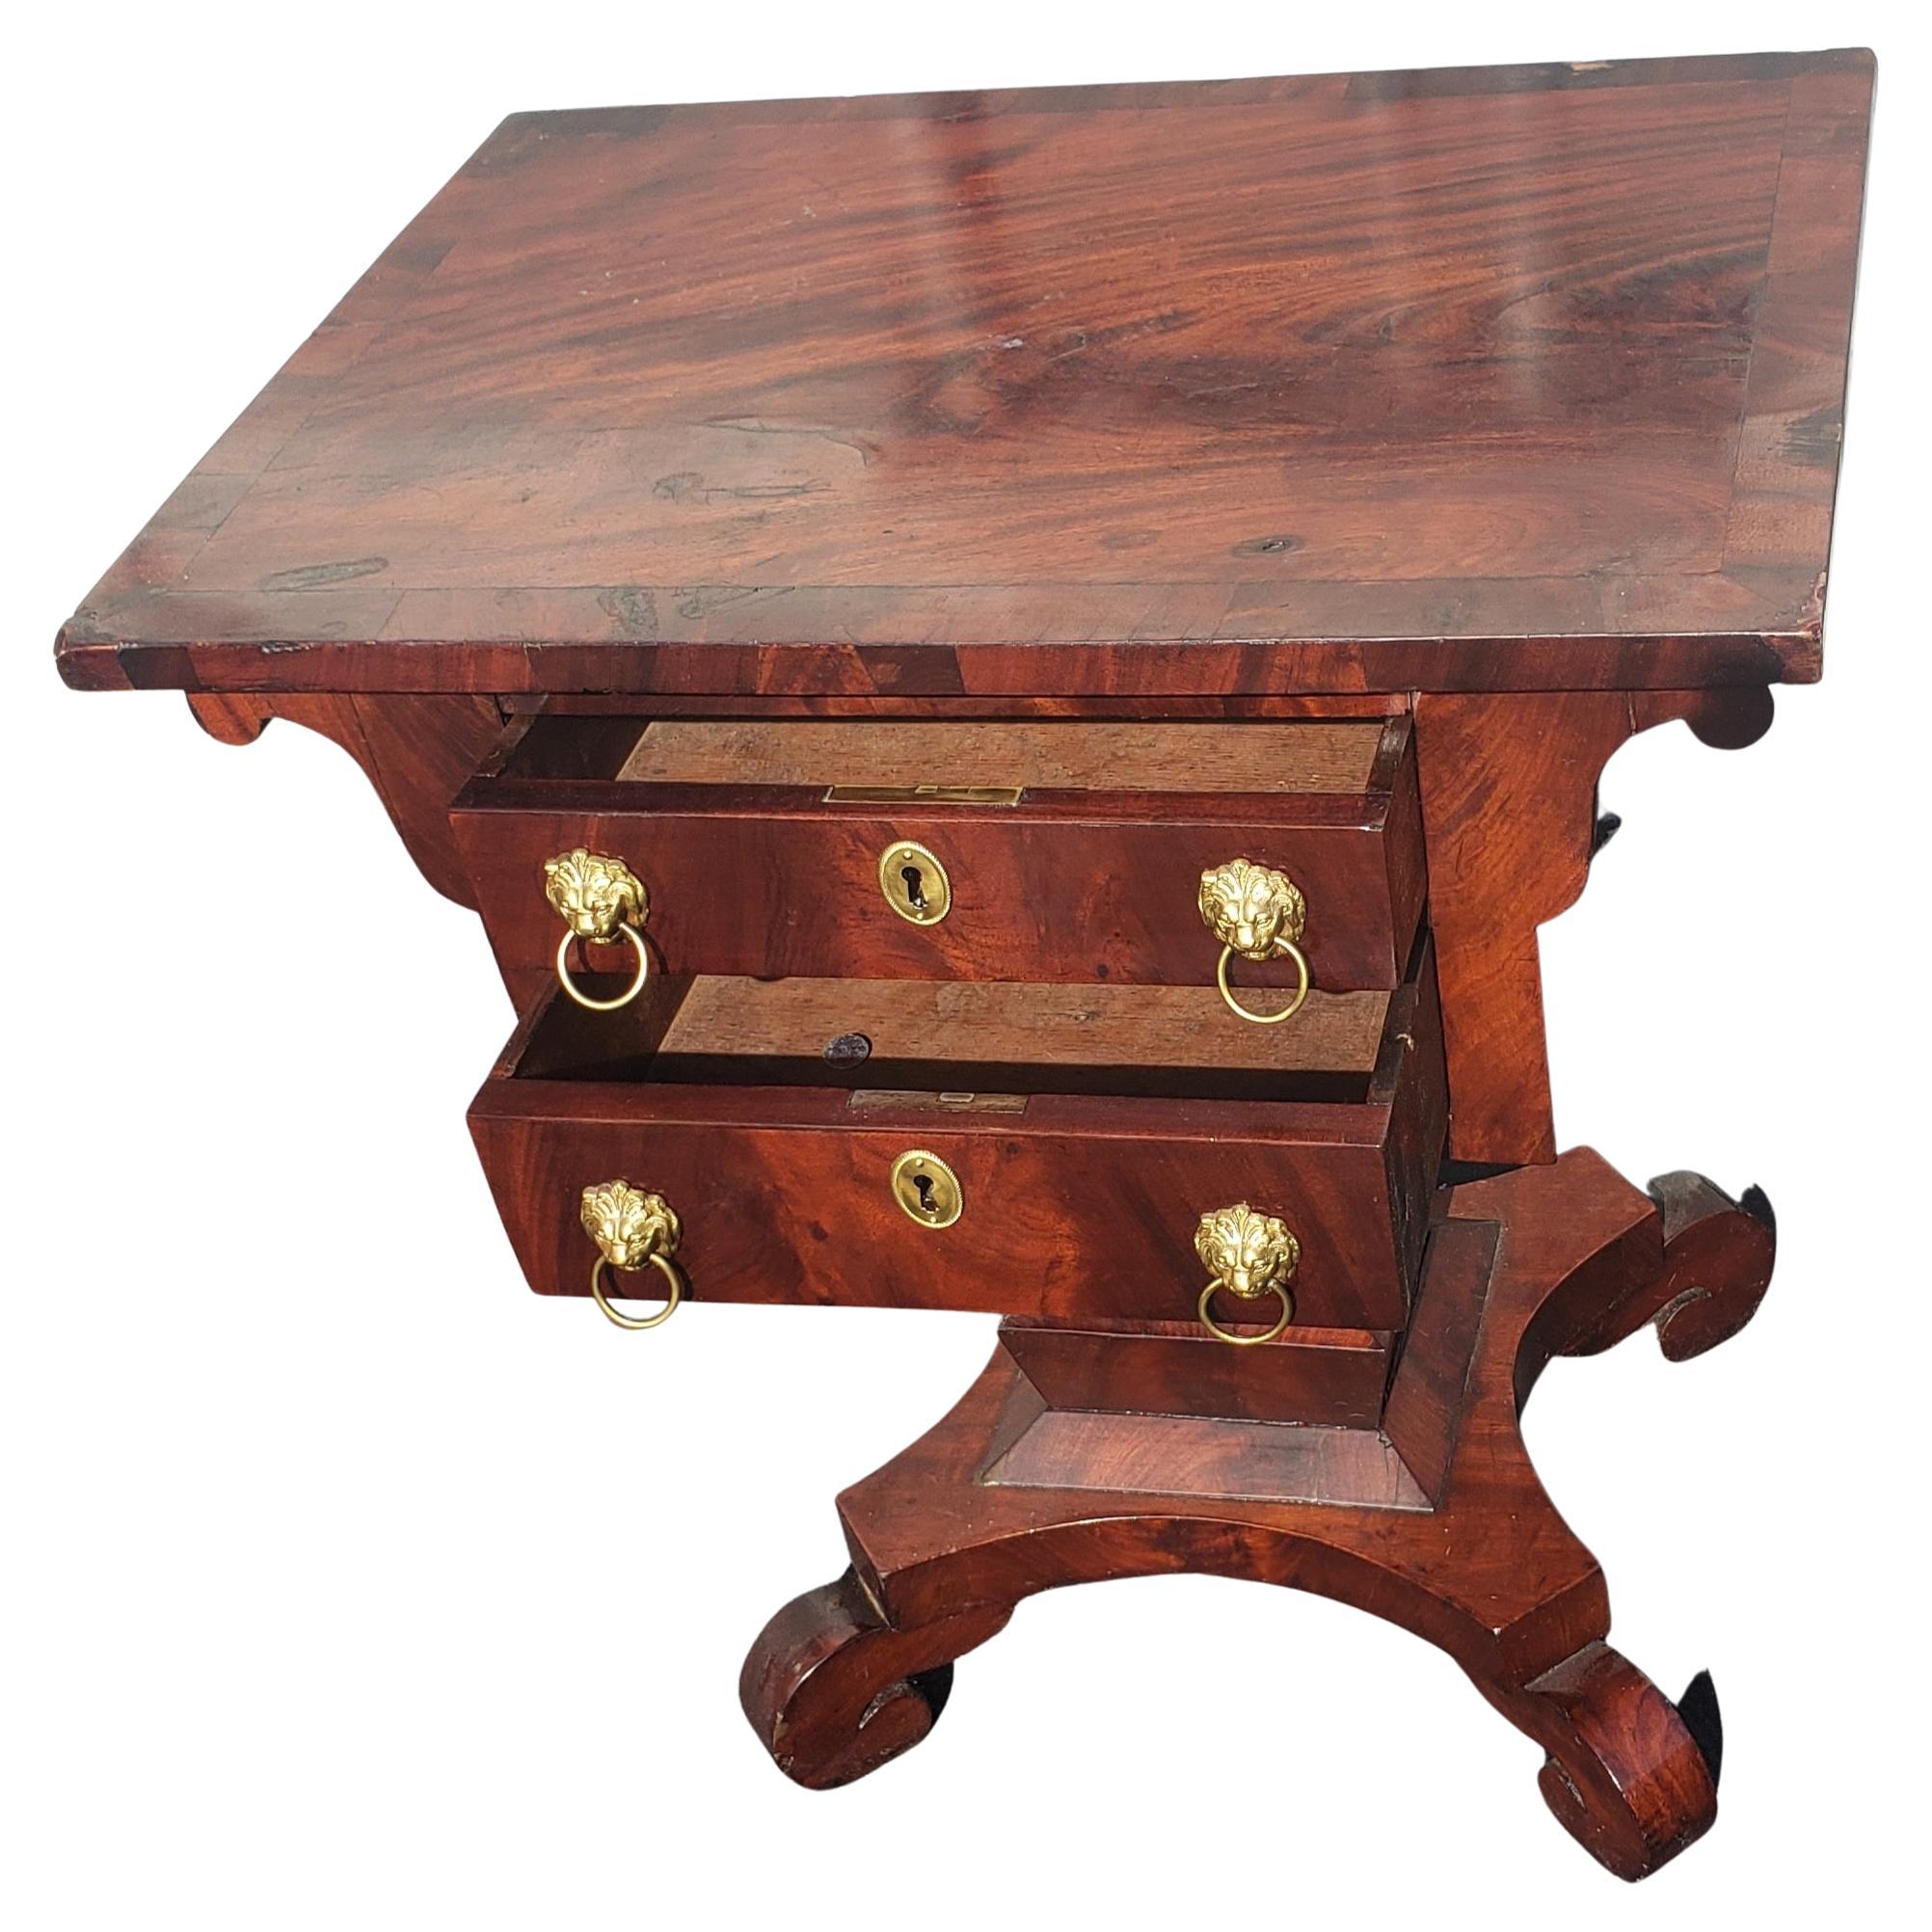 20th Century American Empire Two-Drawer Flame Mahogany Side Table End Table, Circa 1800s